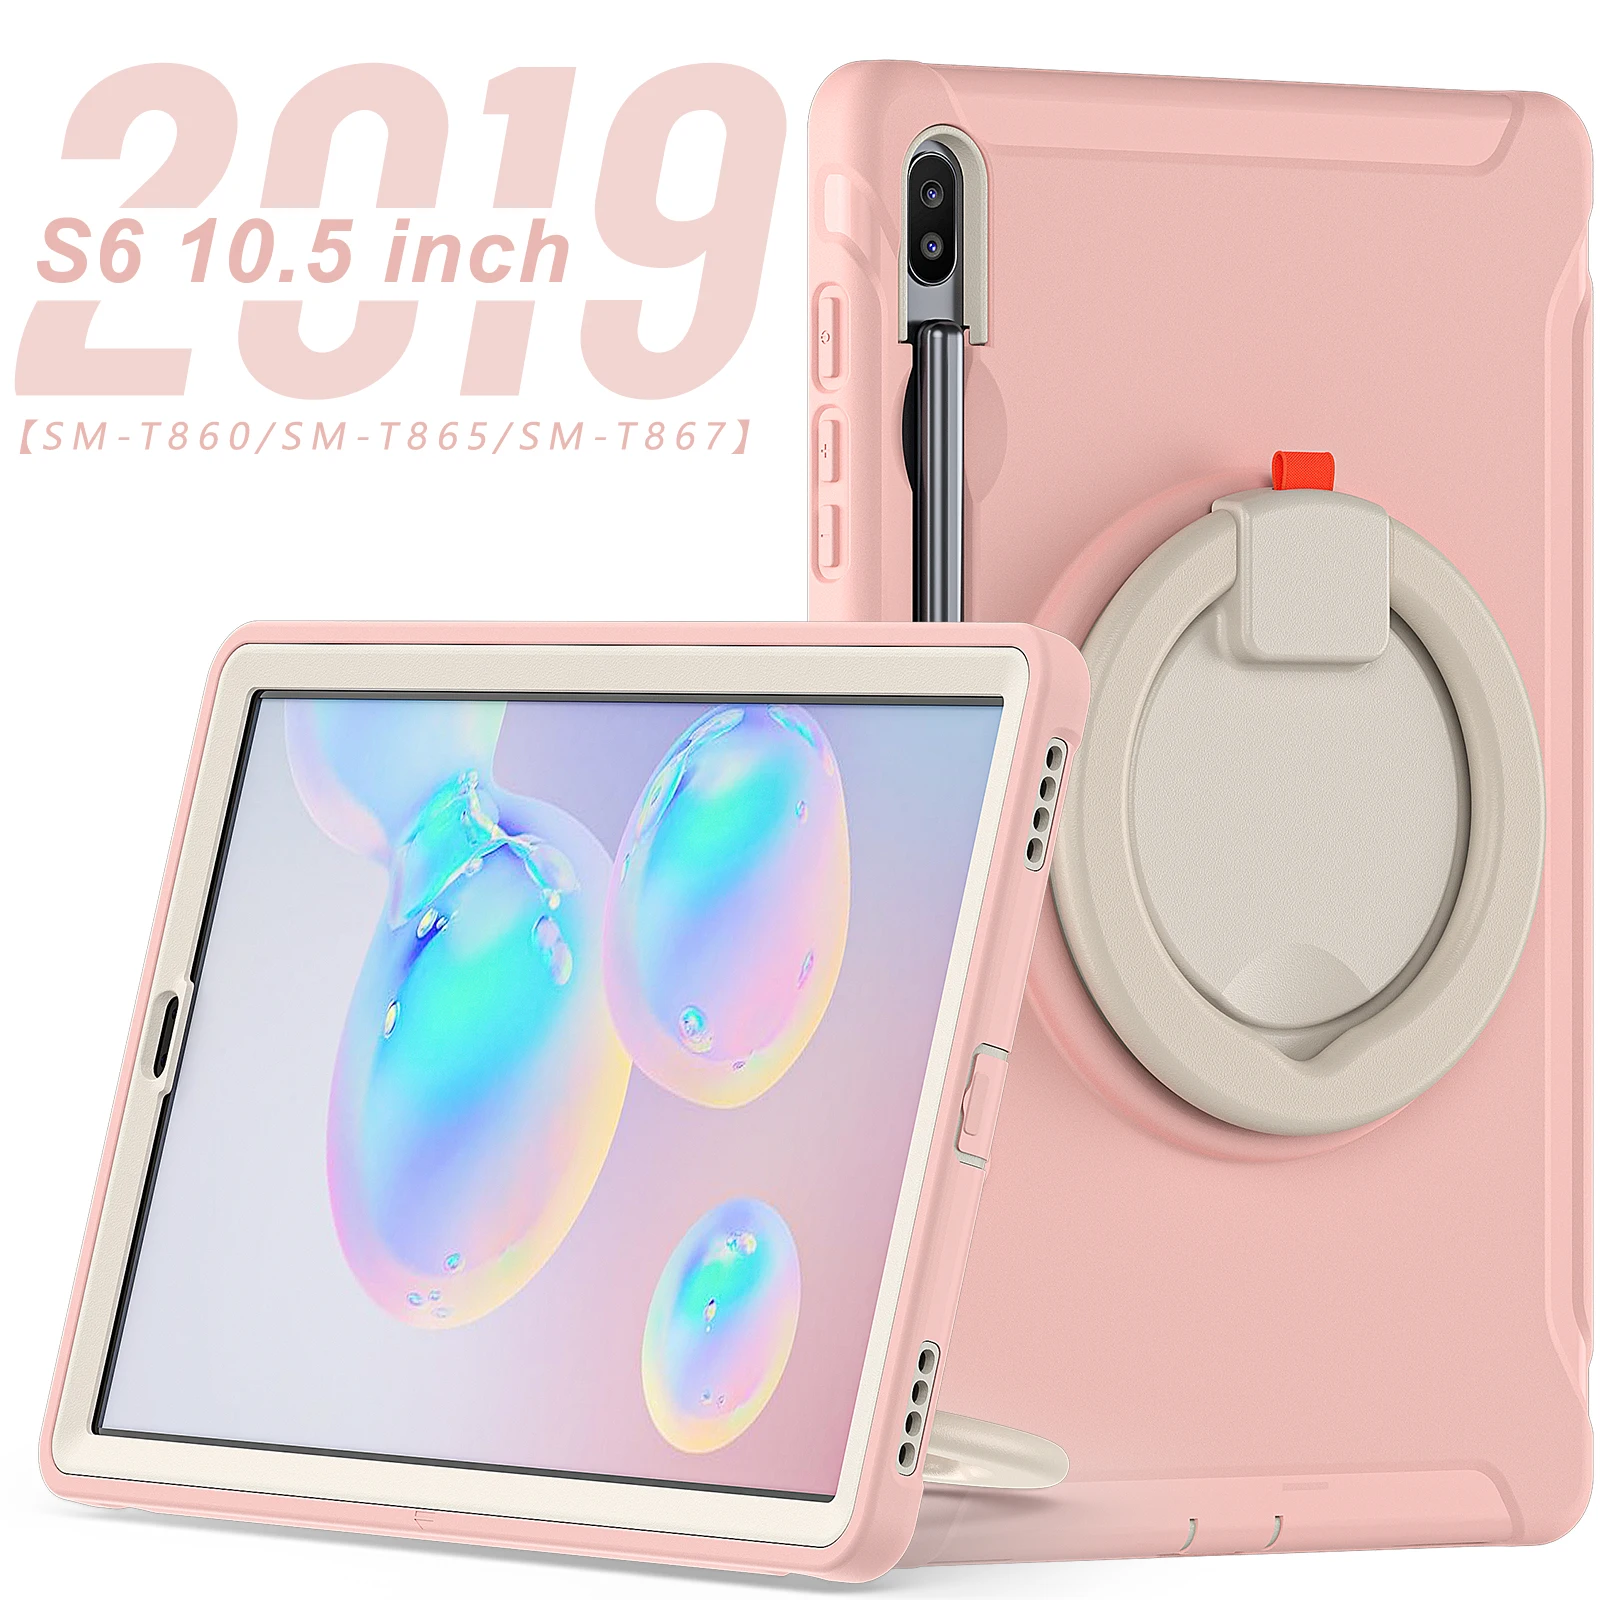 

For Samsung Galaxy Tab S6 10.5 inch 2019 SMT860 T865 SM-T867 Case Kids Safe Armor Shockproof PC +TPU Hybrid Stand Tablet Cover